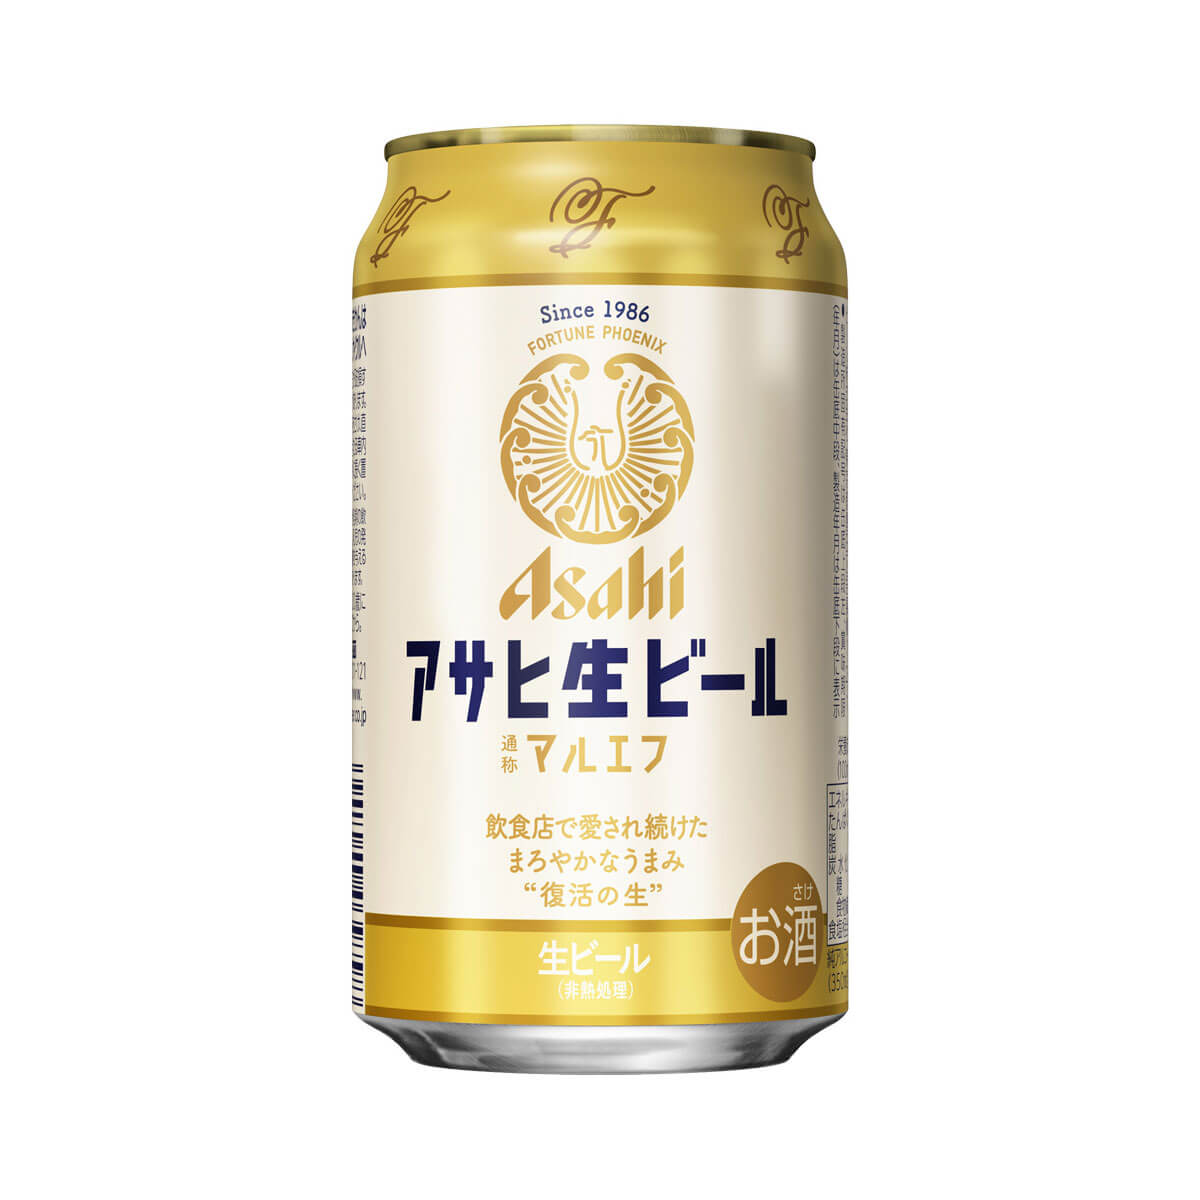  beer Asahi raw beer maru ef350ml×24ps.@1 case free shipping domestic production beer .. Asahi restoration the lowest price . challenge bulk buying 24 can YF